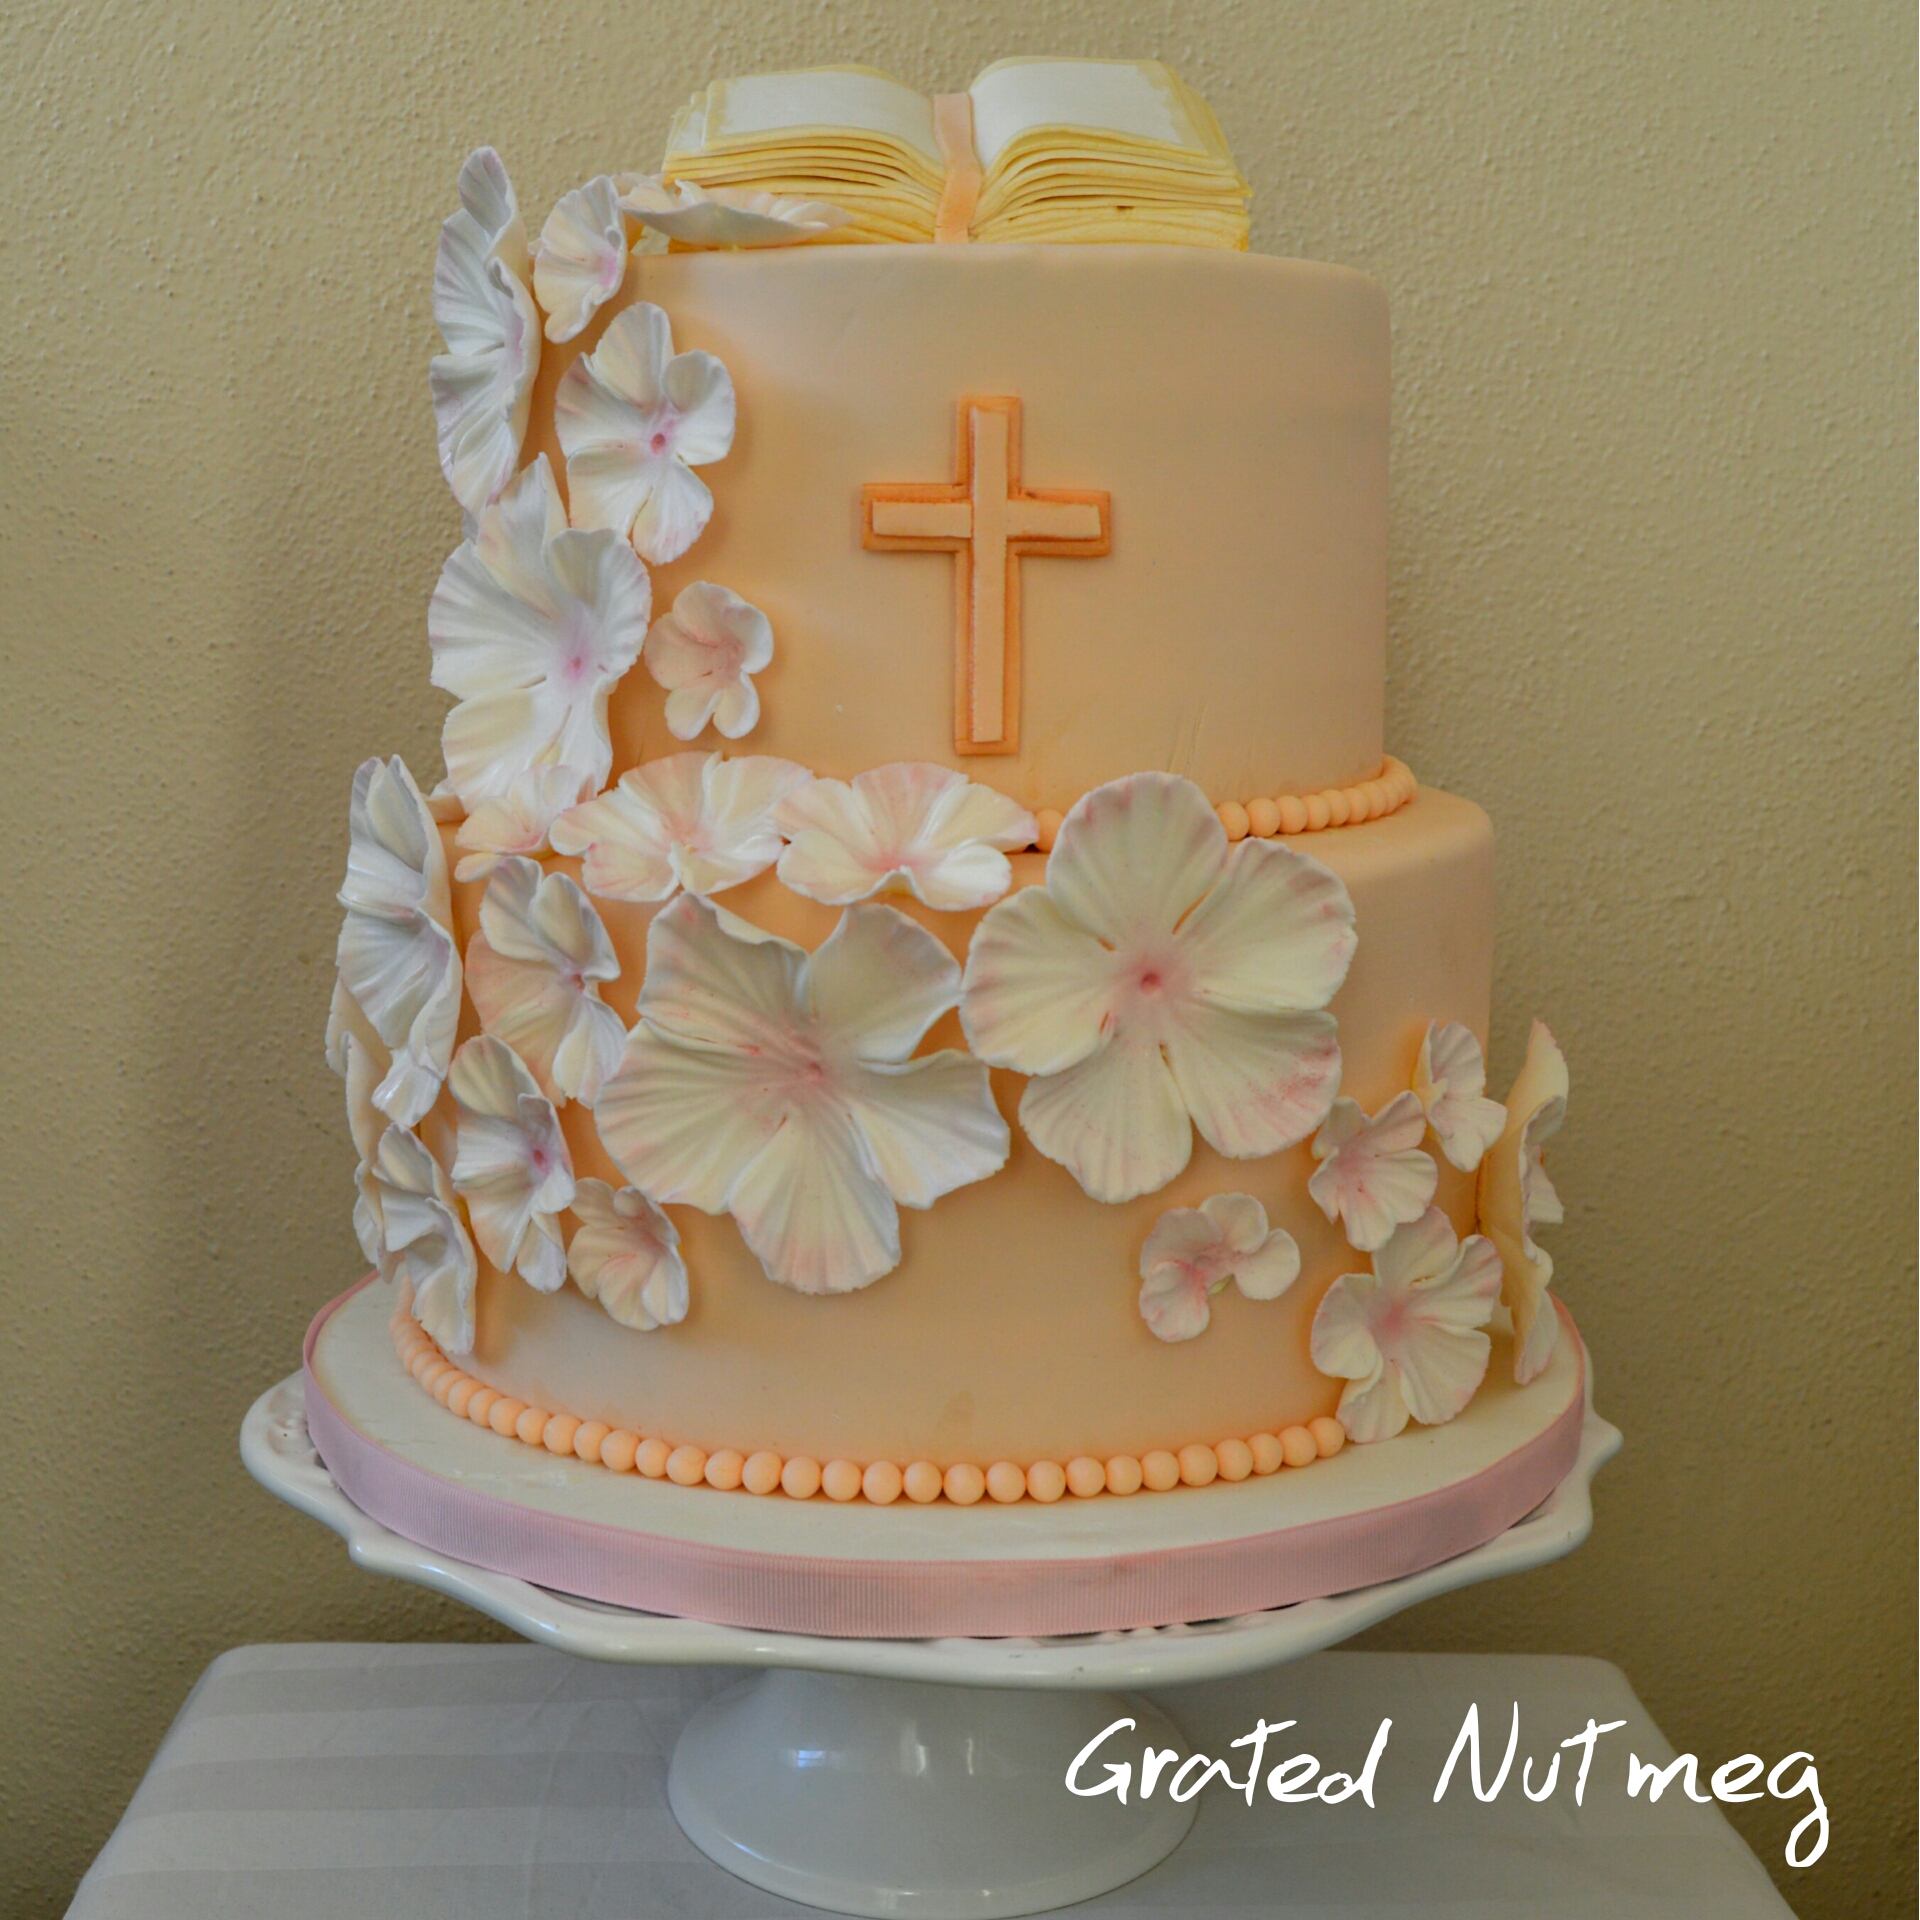 The Making of an Ivory Blossom Cake